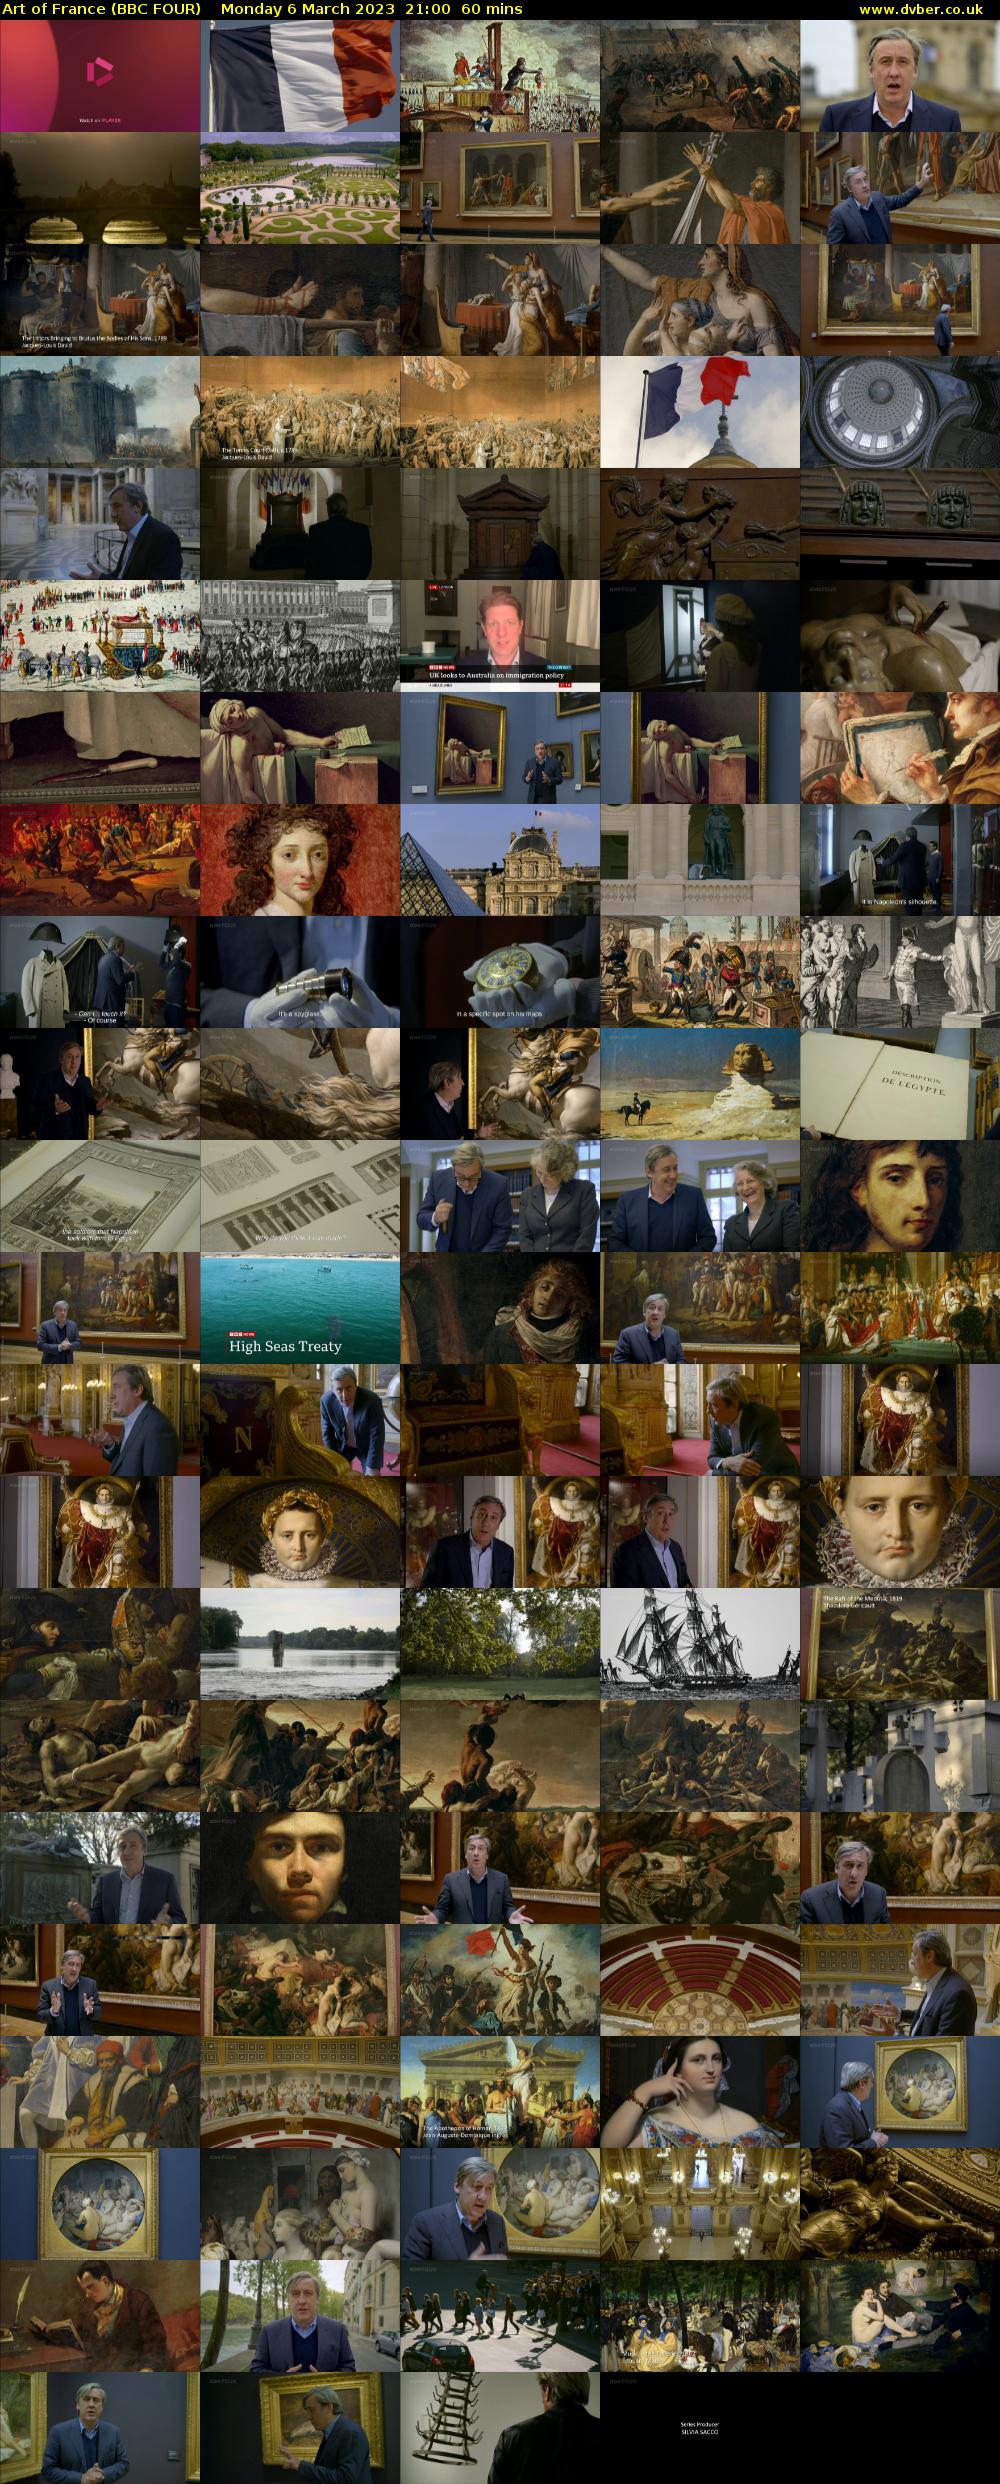 Art of France (BBC FOUR) Monday 6 March 2023 21:00 - 22:00